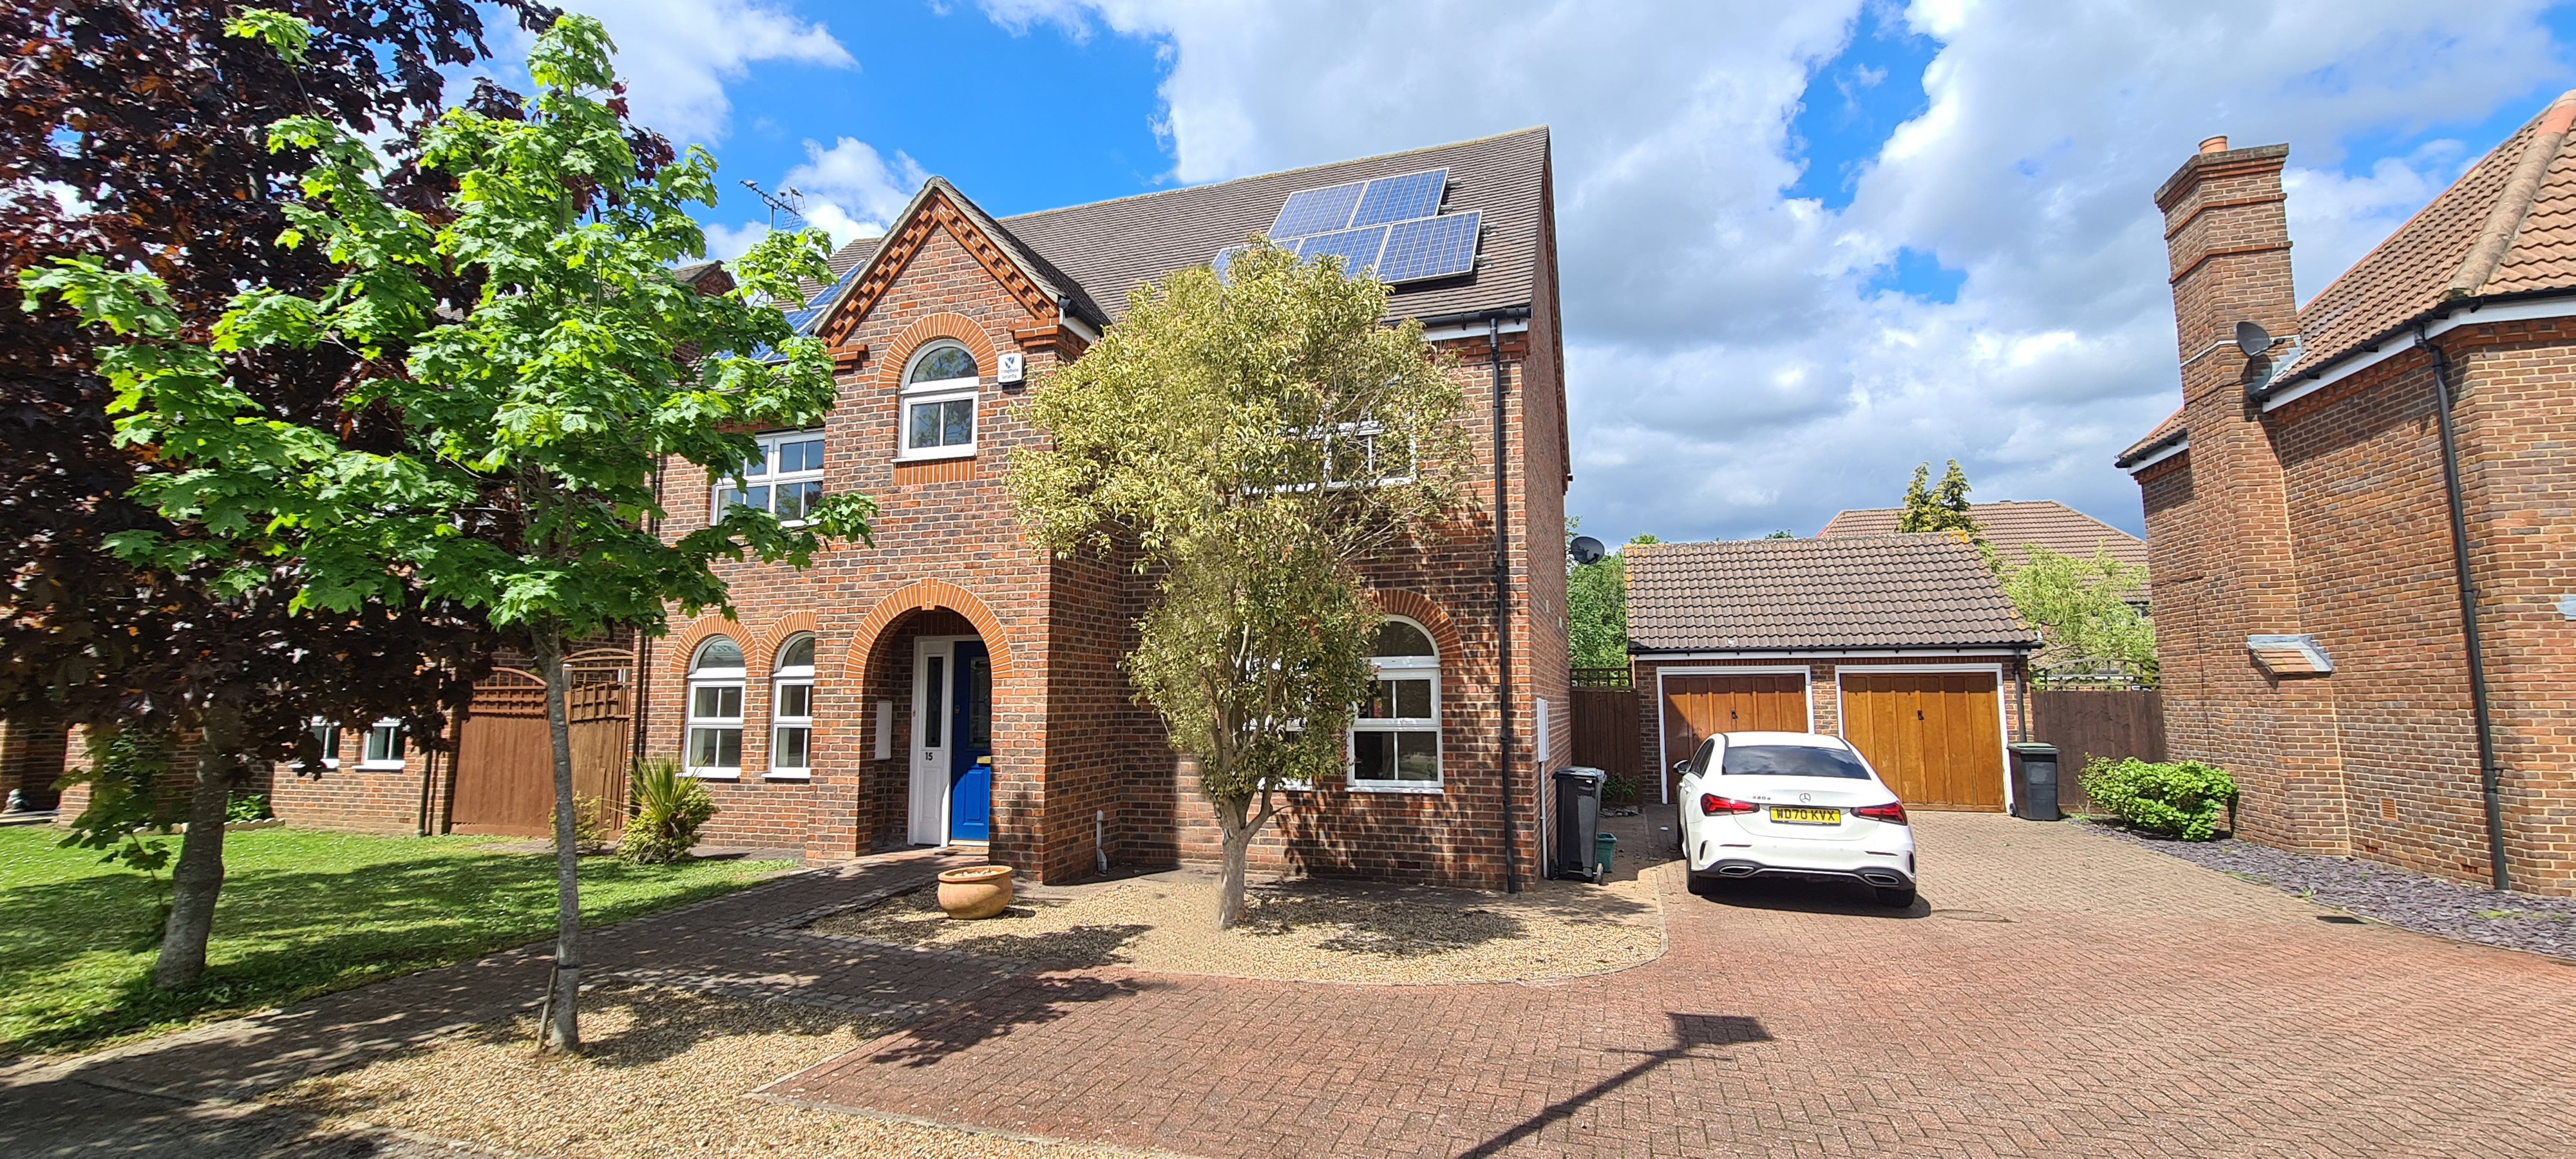 4 bed detached house to rent in Deer Park Way (Ref 43903), Waltham Abbey - Property Image 1